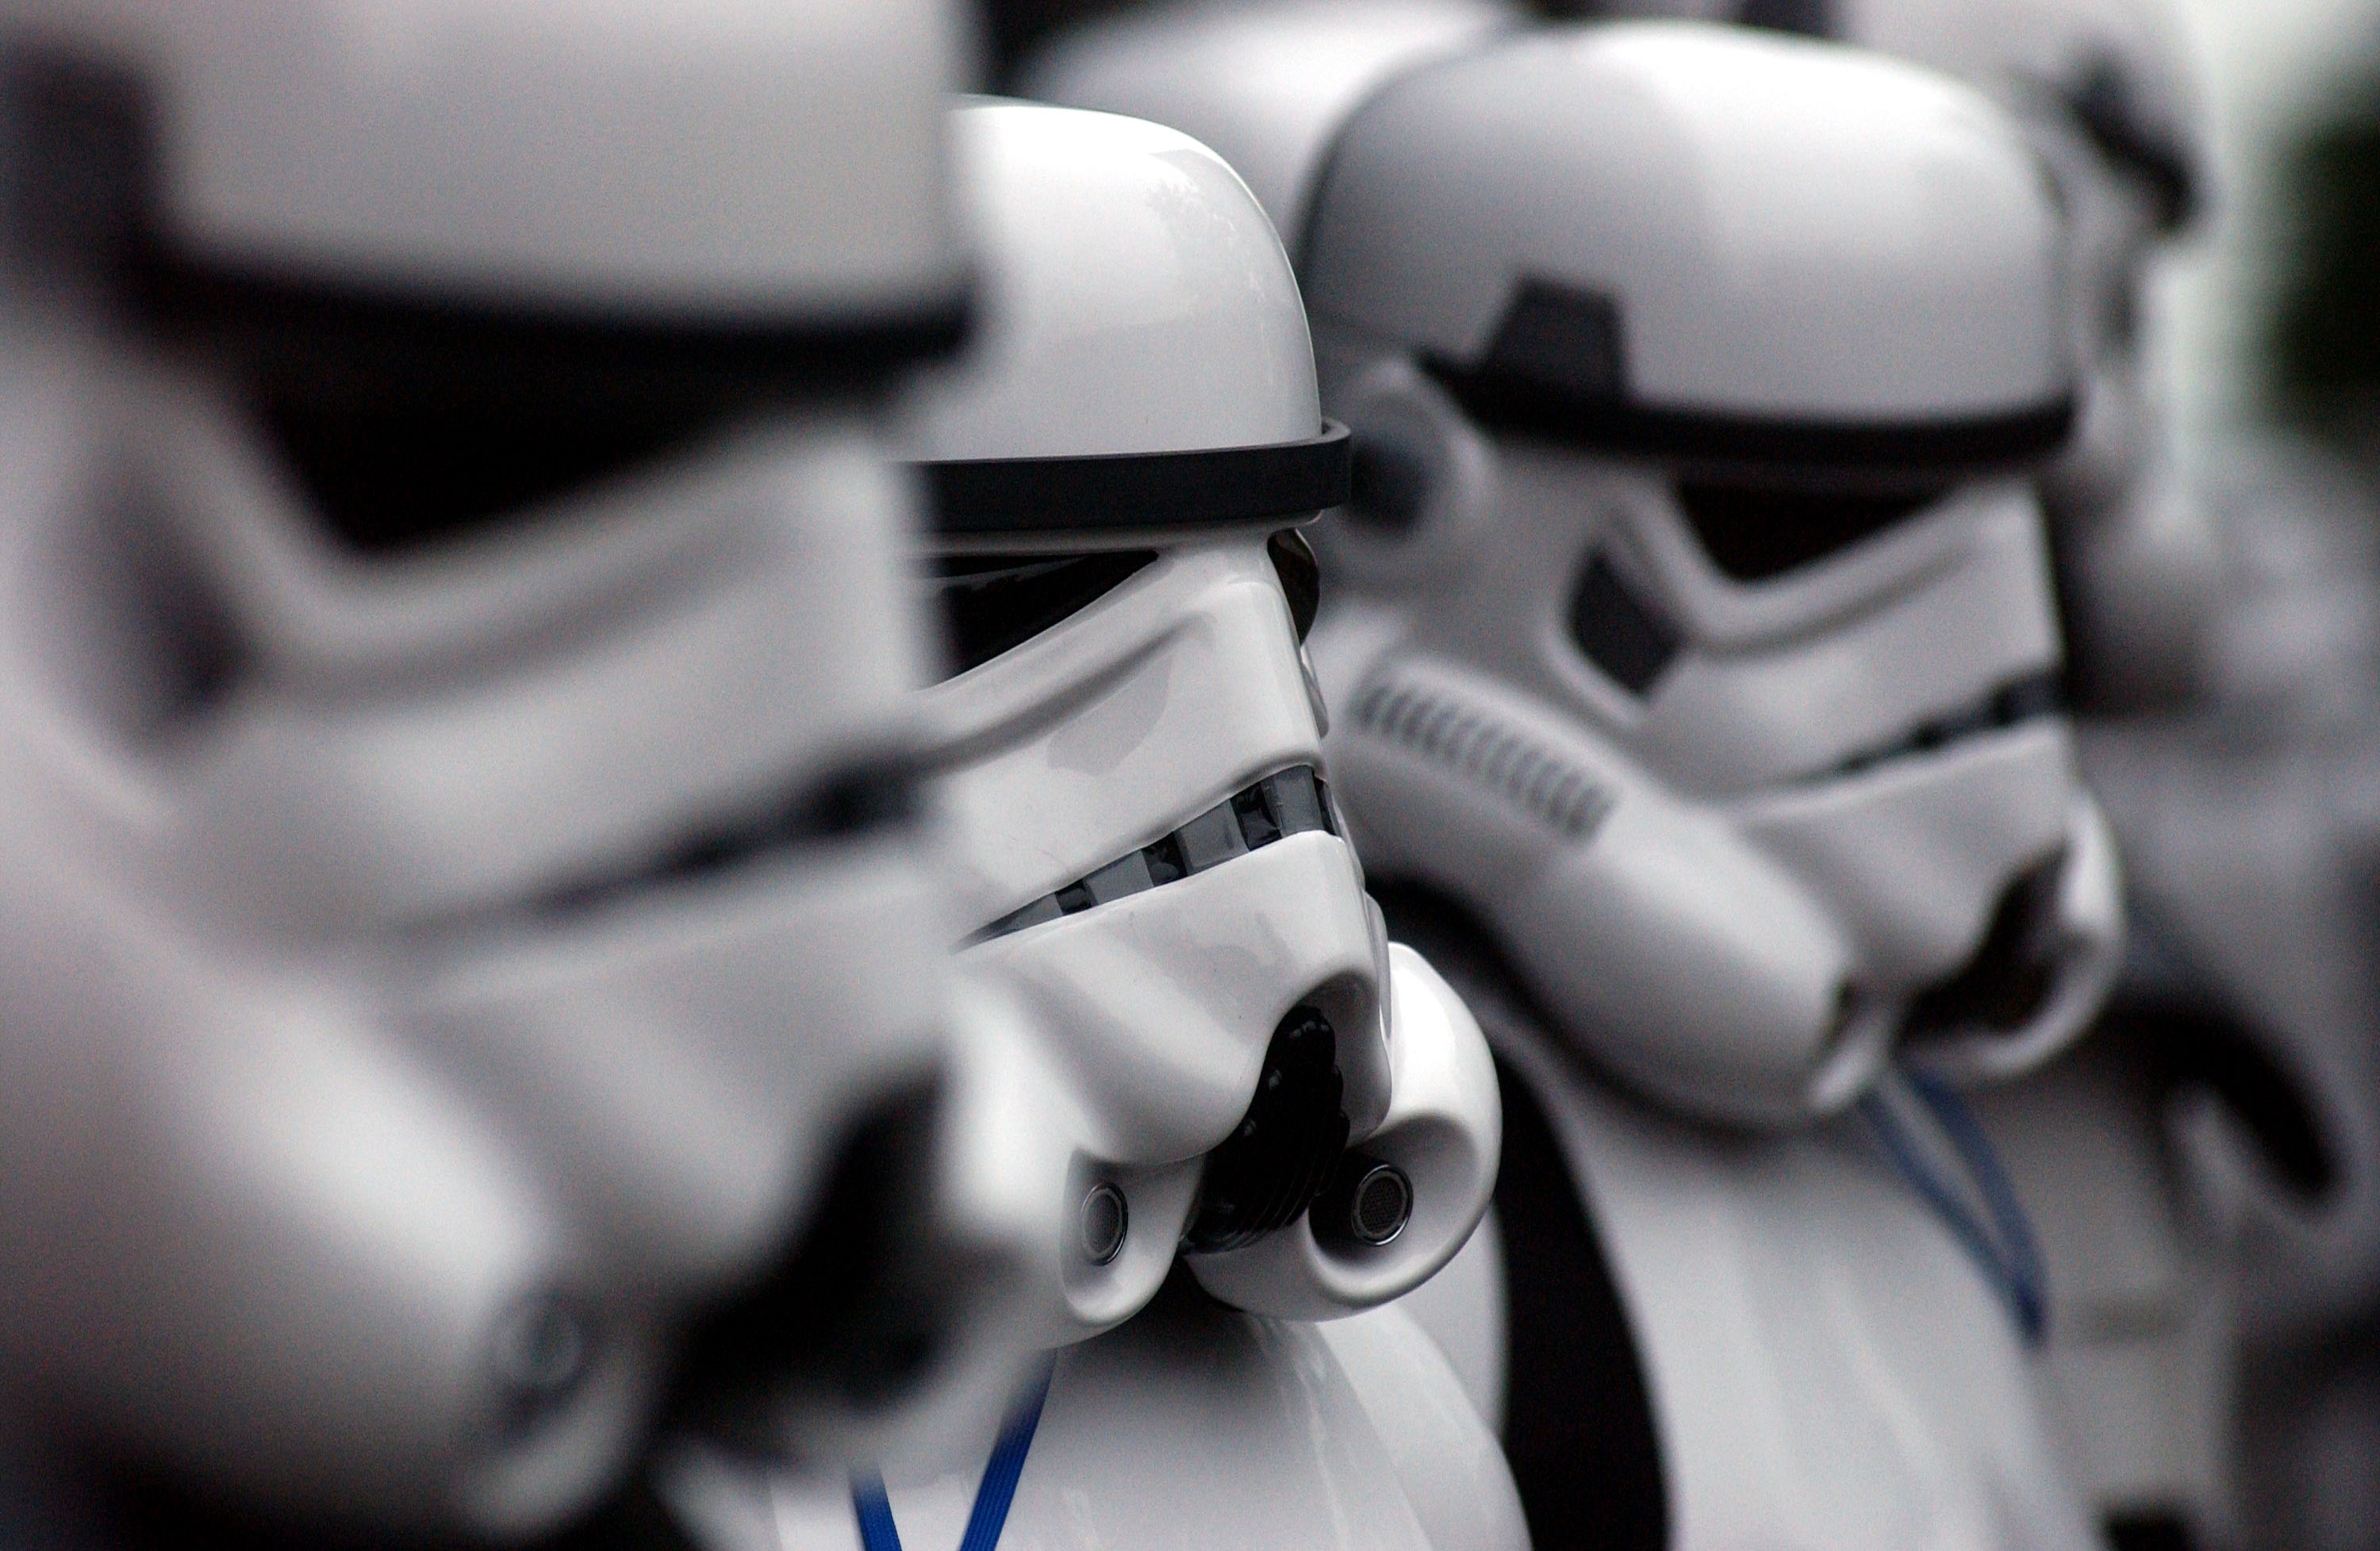 A number of Stormtroopers standing next to each other